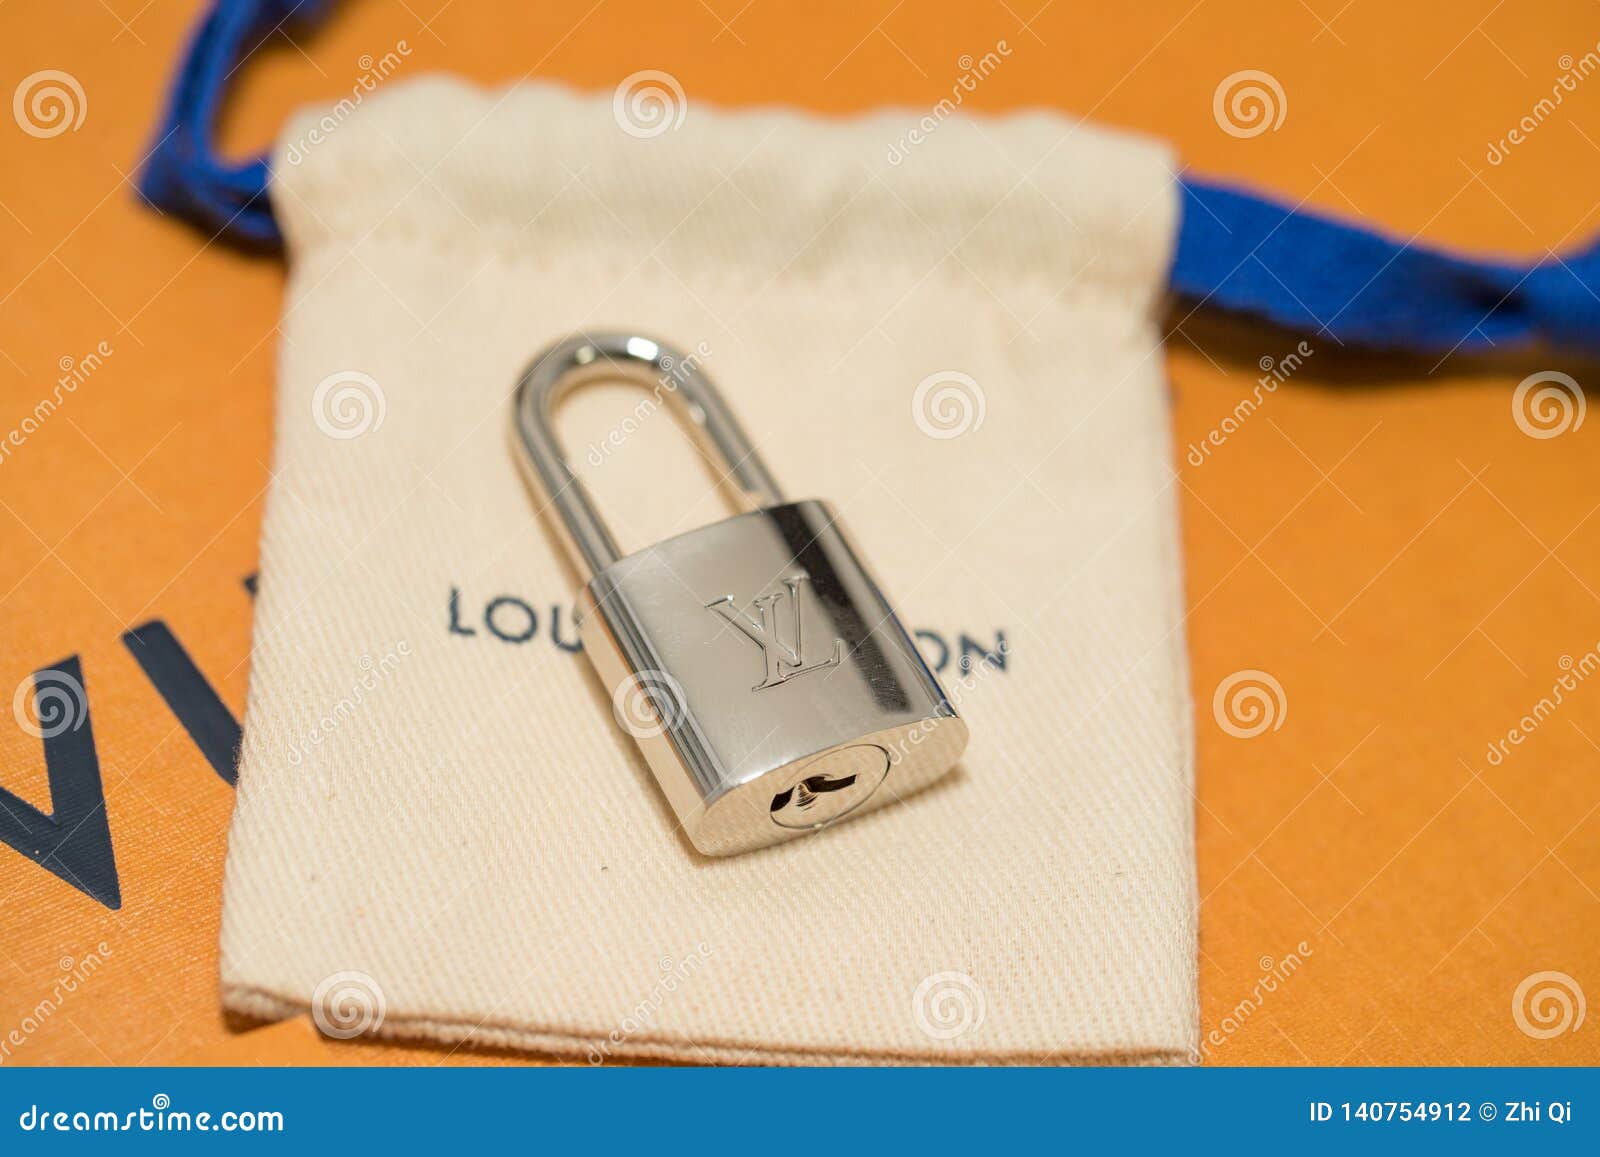 Louis Vuitton Lock on the Table. Photography - Image of metal, linda: 140754912